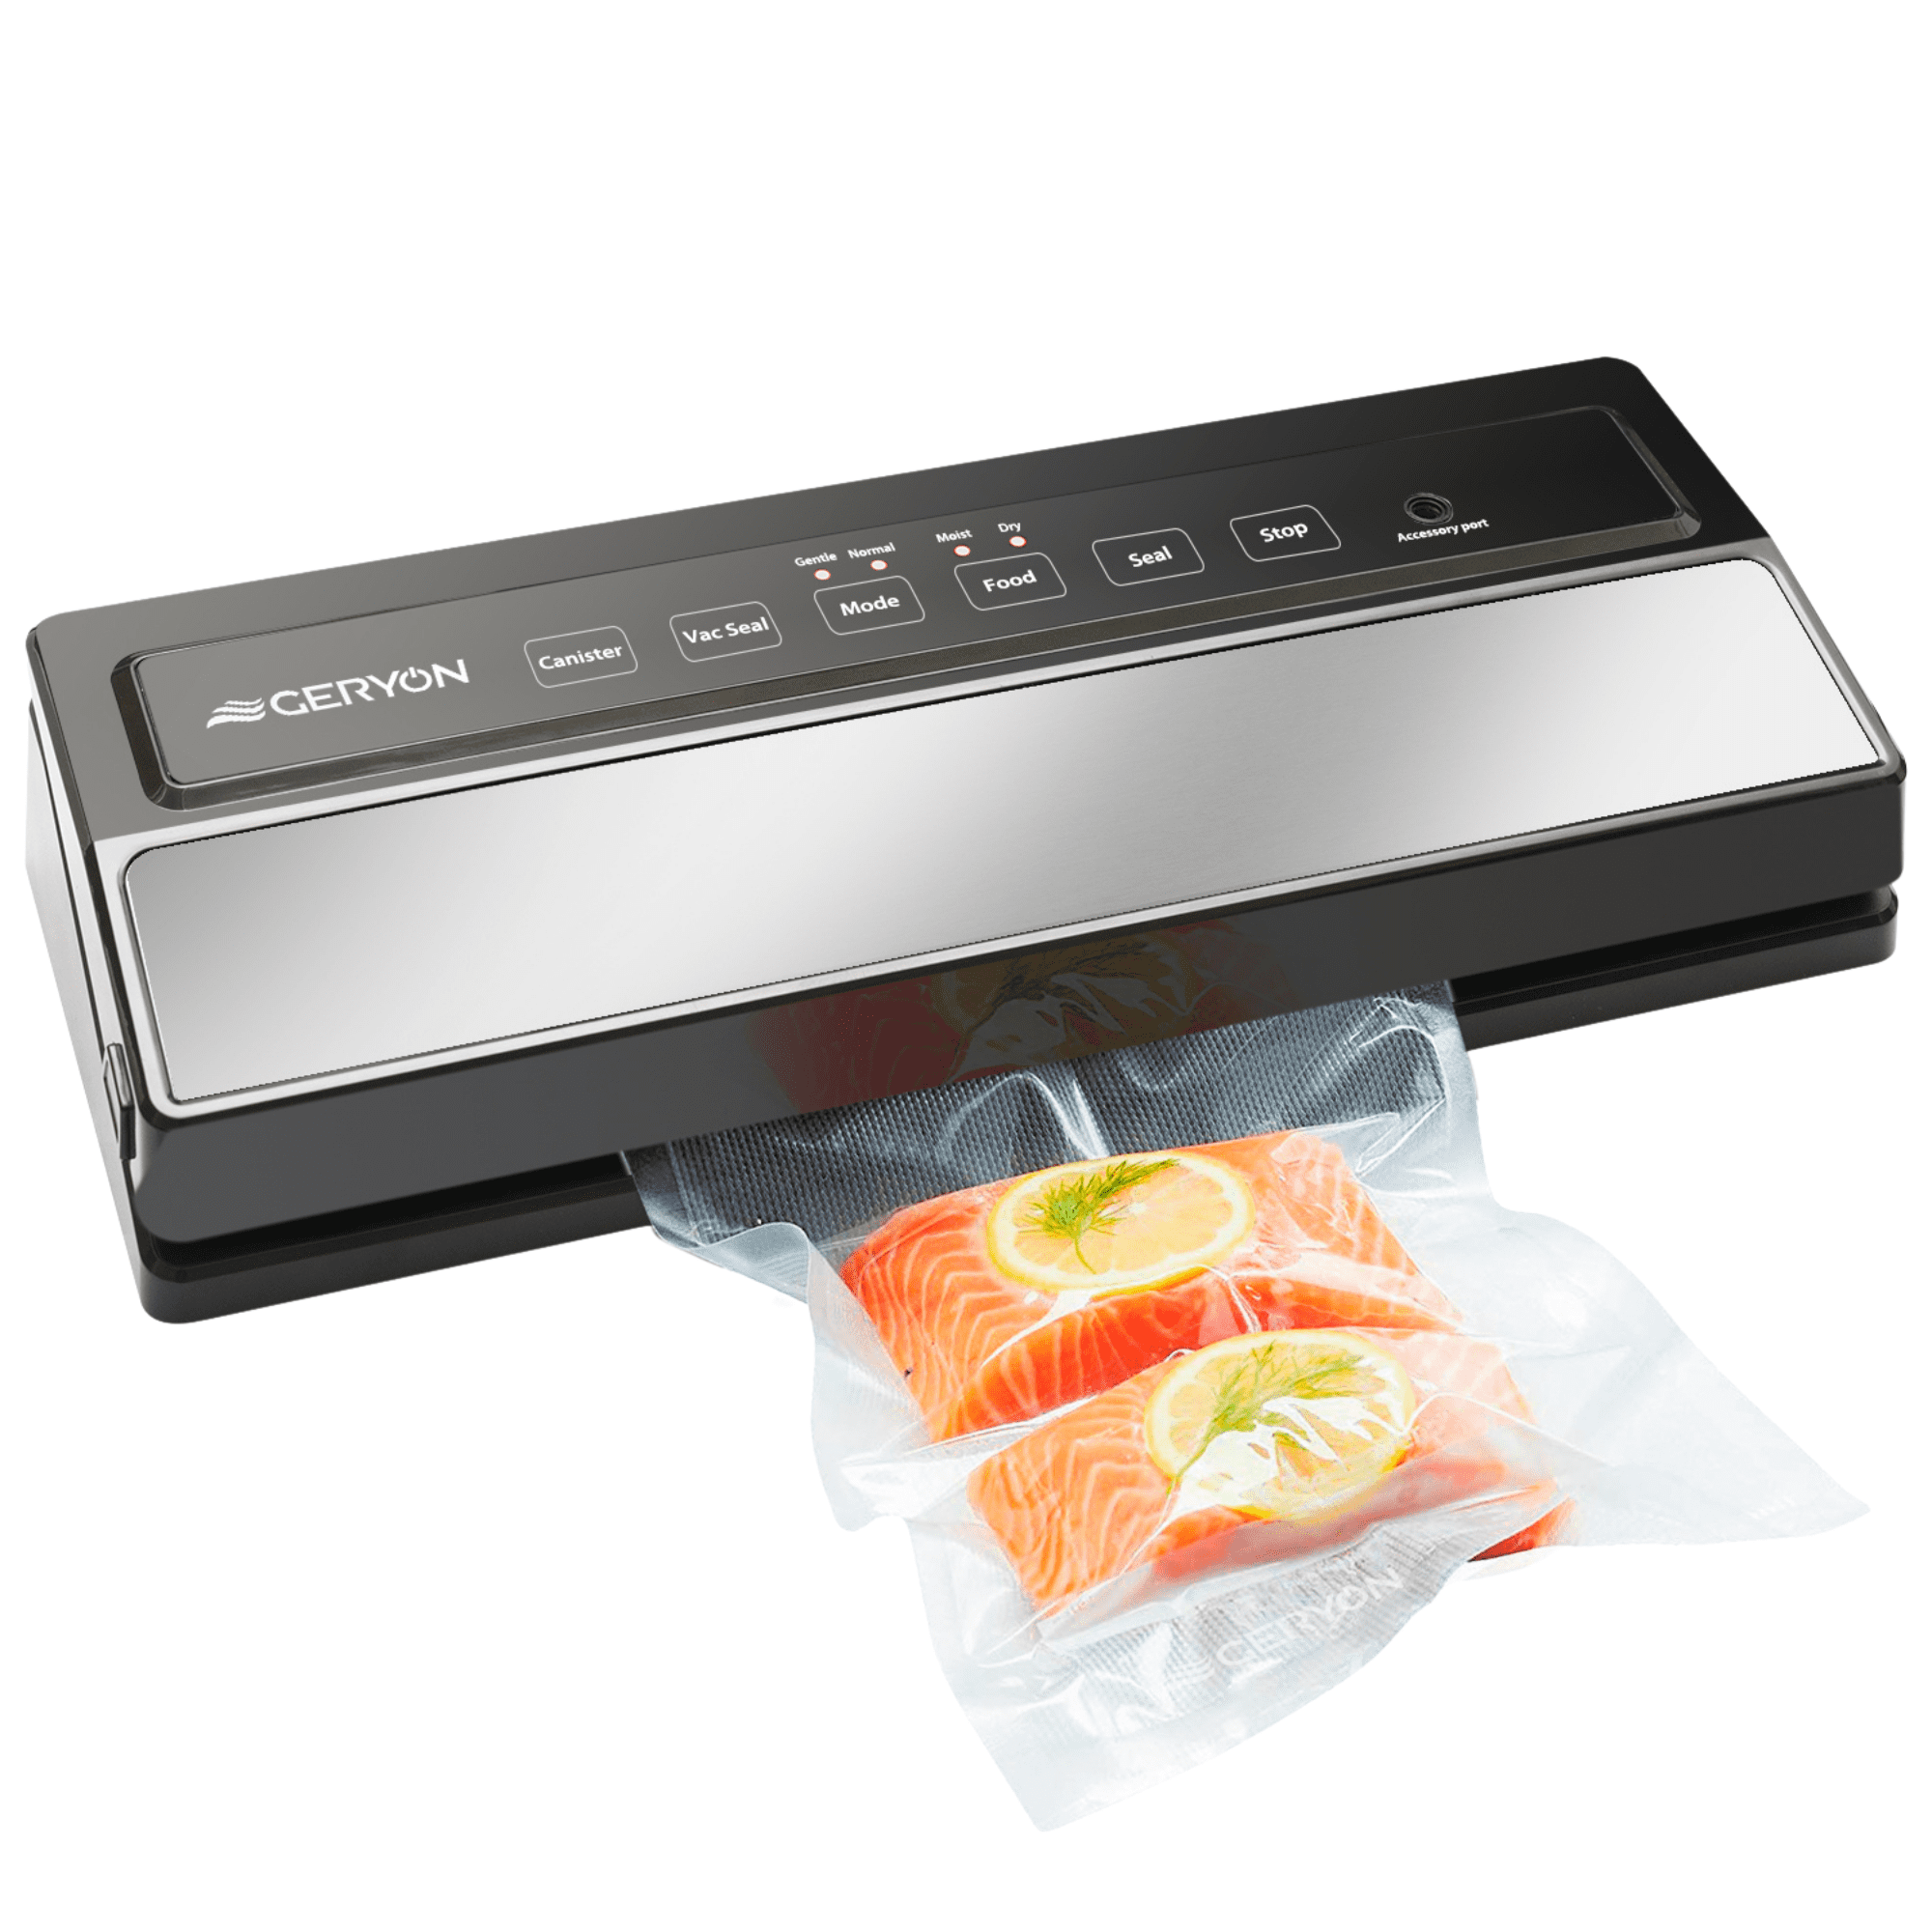 GERYON Vacuum Sealer - Deluxe Food Sealer Machine with Built-in Bag Cutter  and Roll Storage, Strong Suction for Food Preservation Saver, Dry Moist